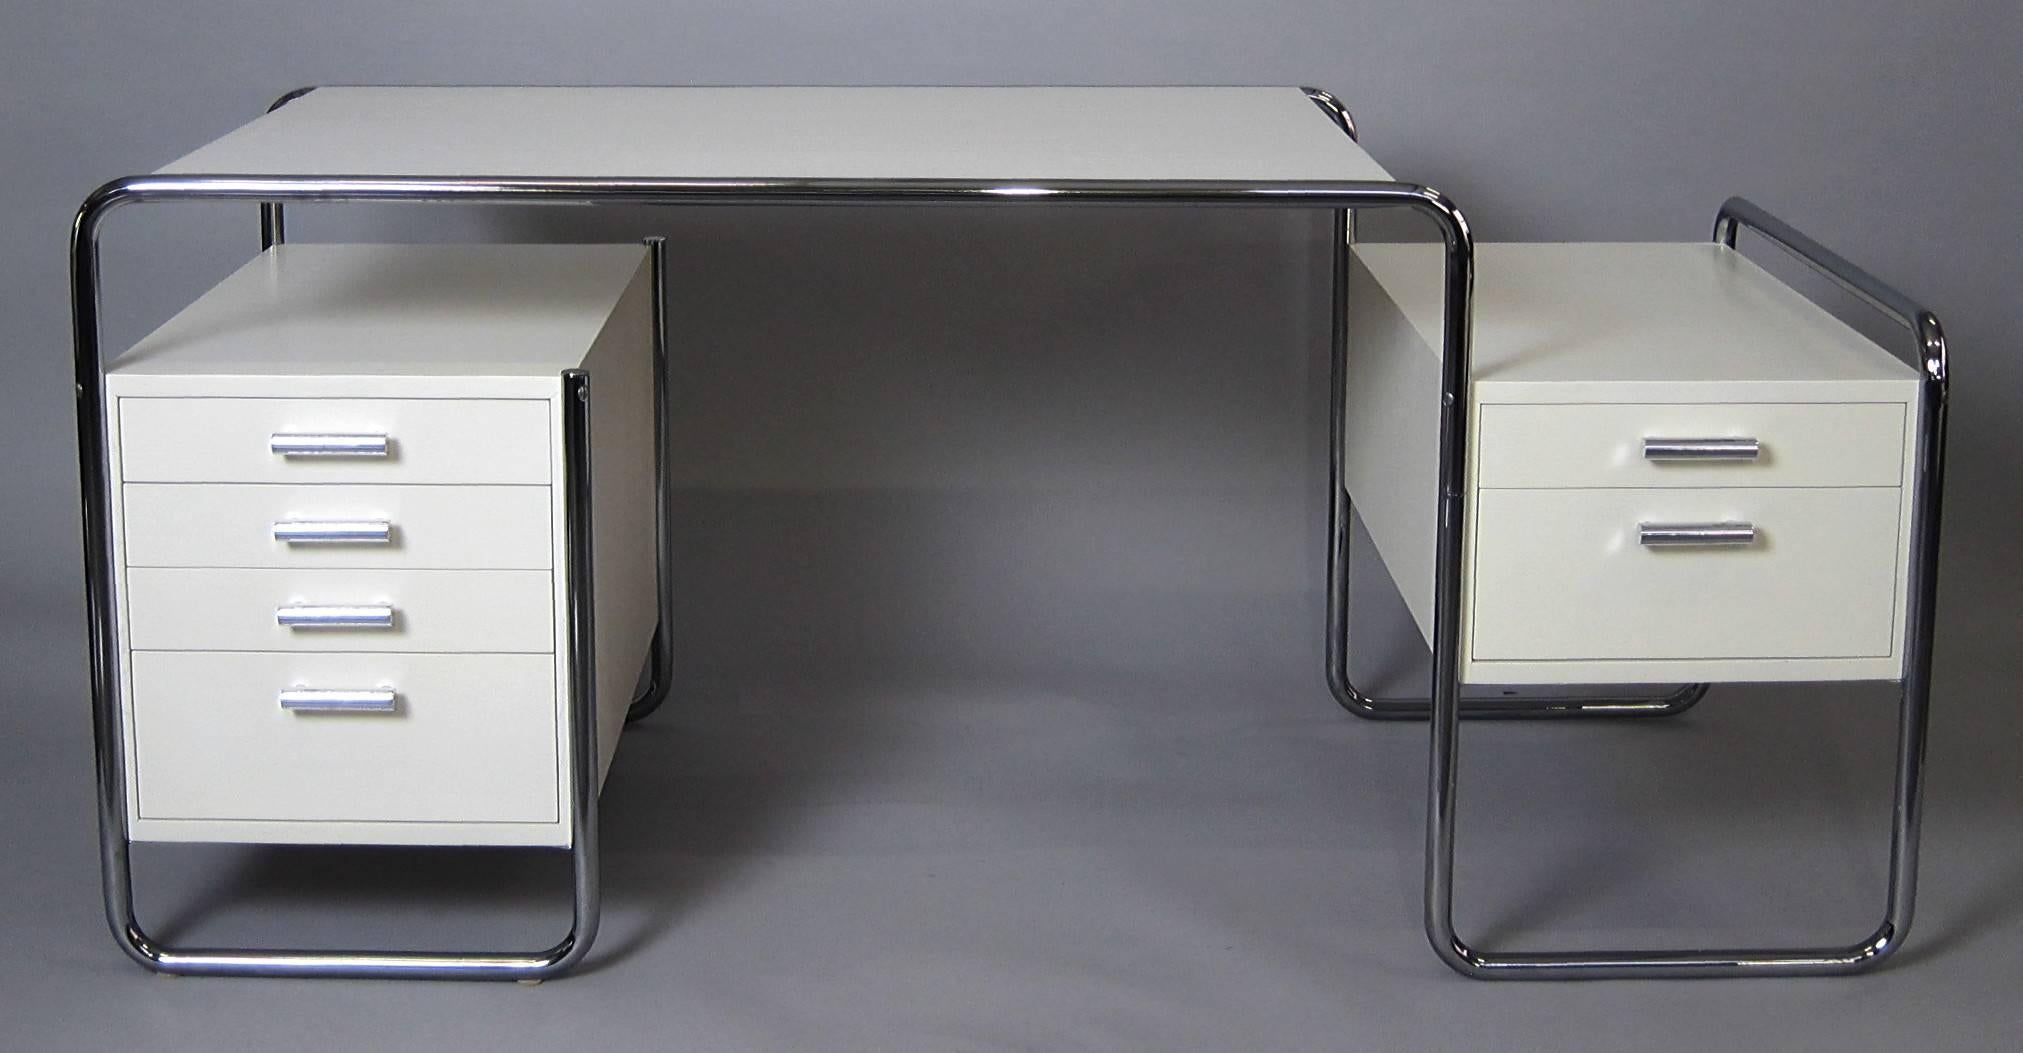 Designed by the Bauhaus architect Marcel Breuer in 1935, this desk shows very well the functional Design of the Bauhaus School. The desk in white lacquered ash with visible wood texture, was produced by Thonet in the 1970s.
Keys are missing.